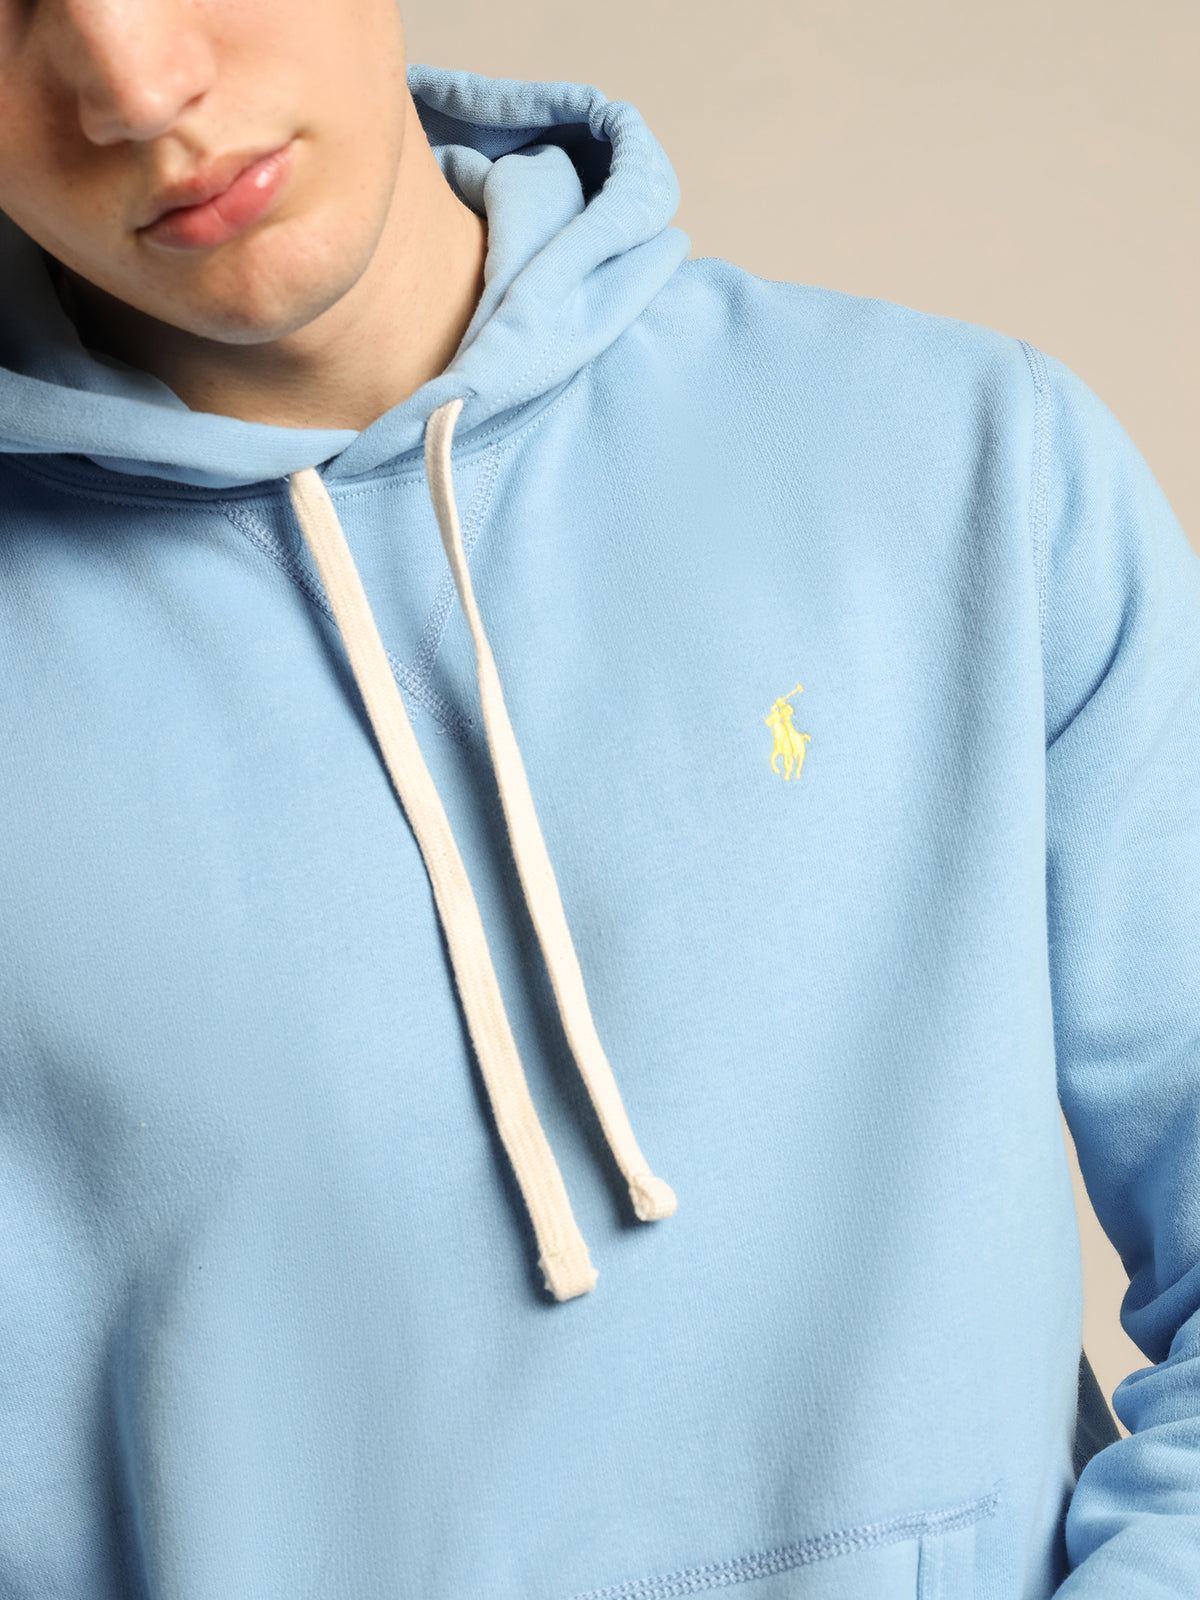 Classic Pop Over Hoodie in Blue Lagoon